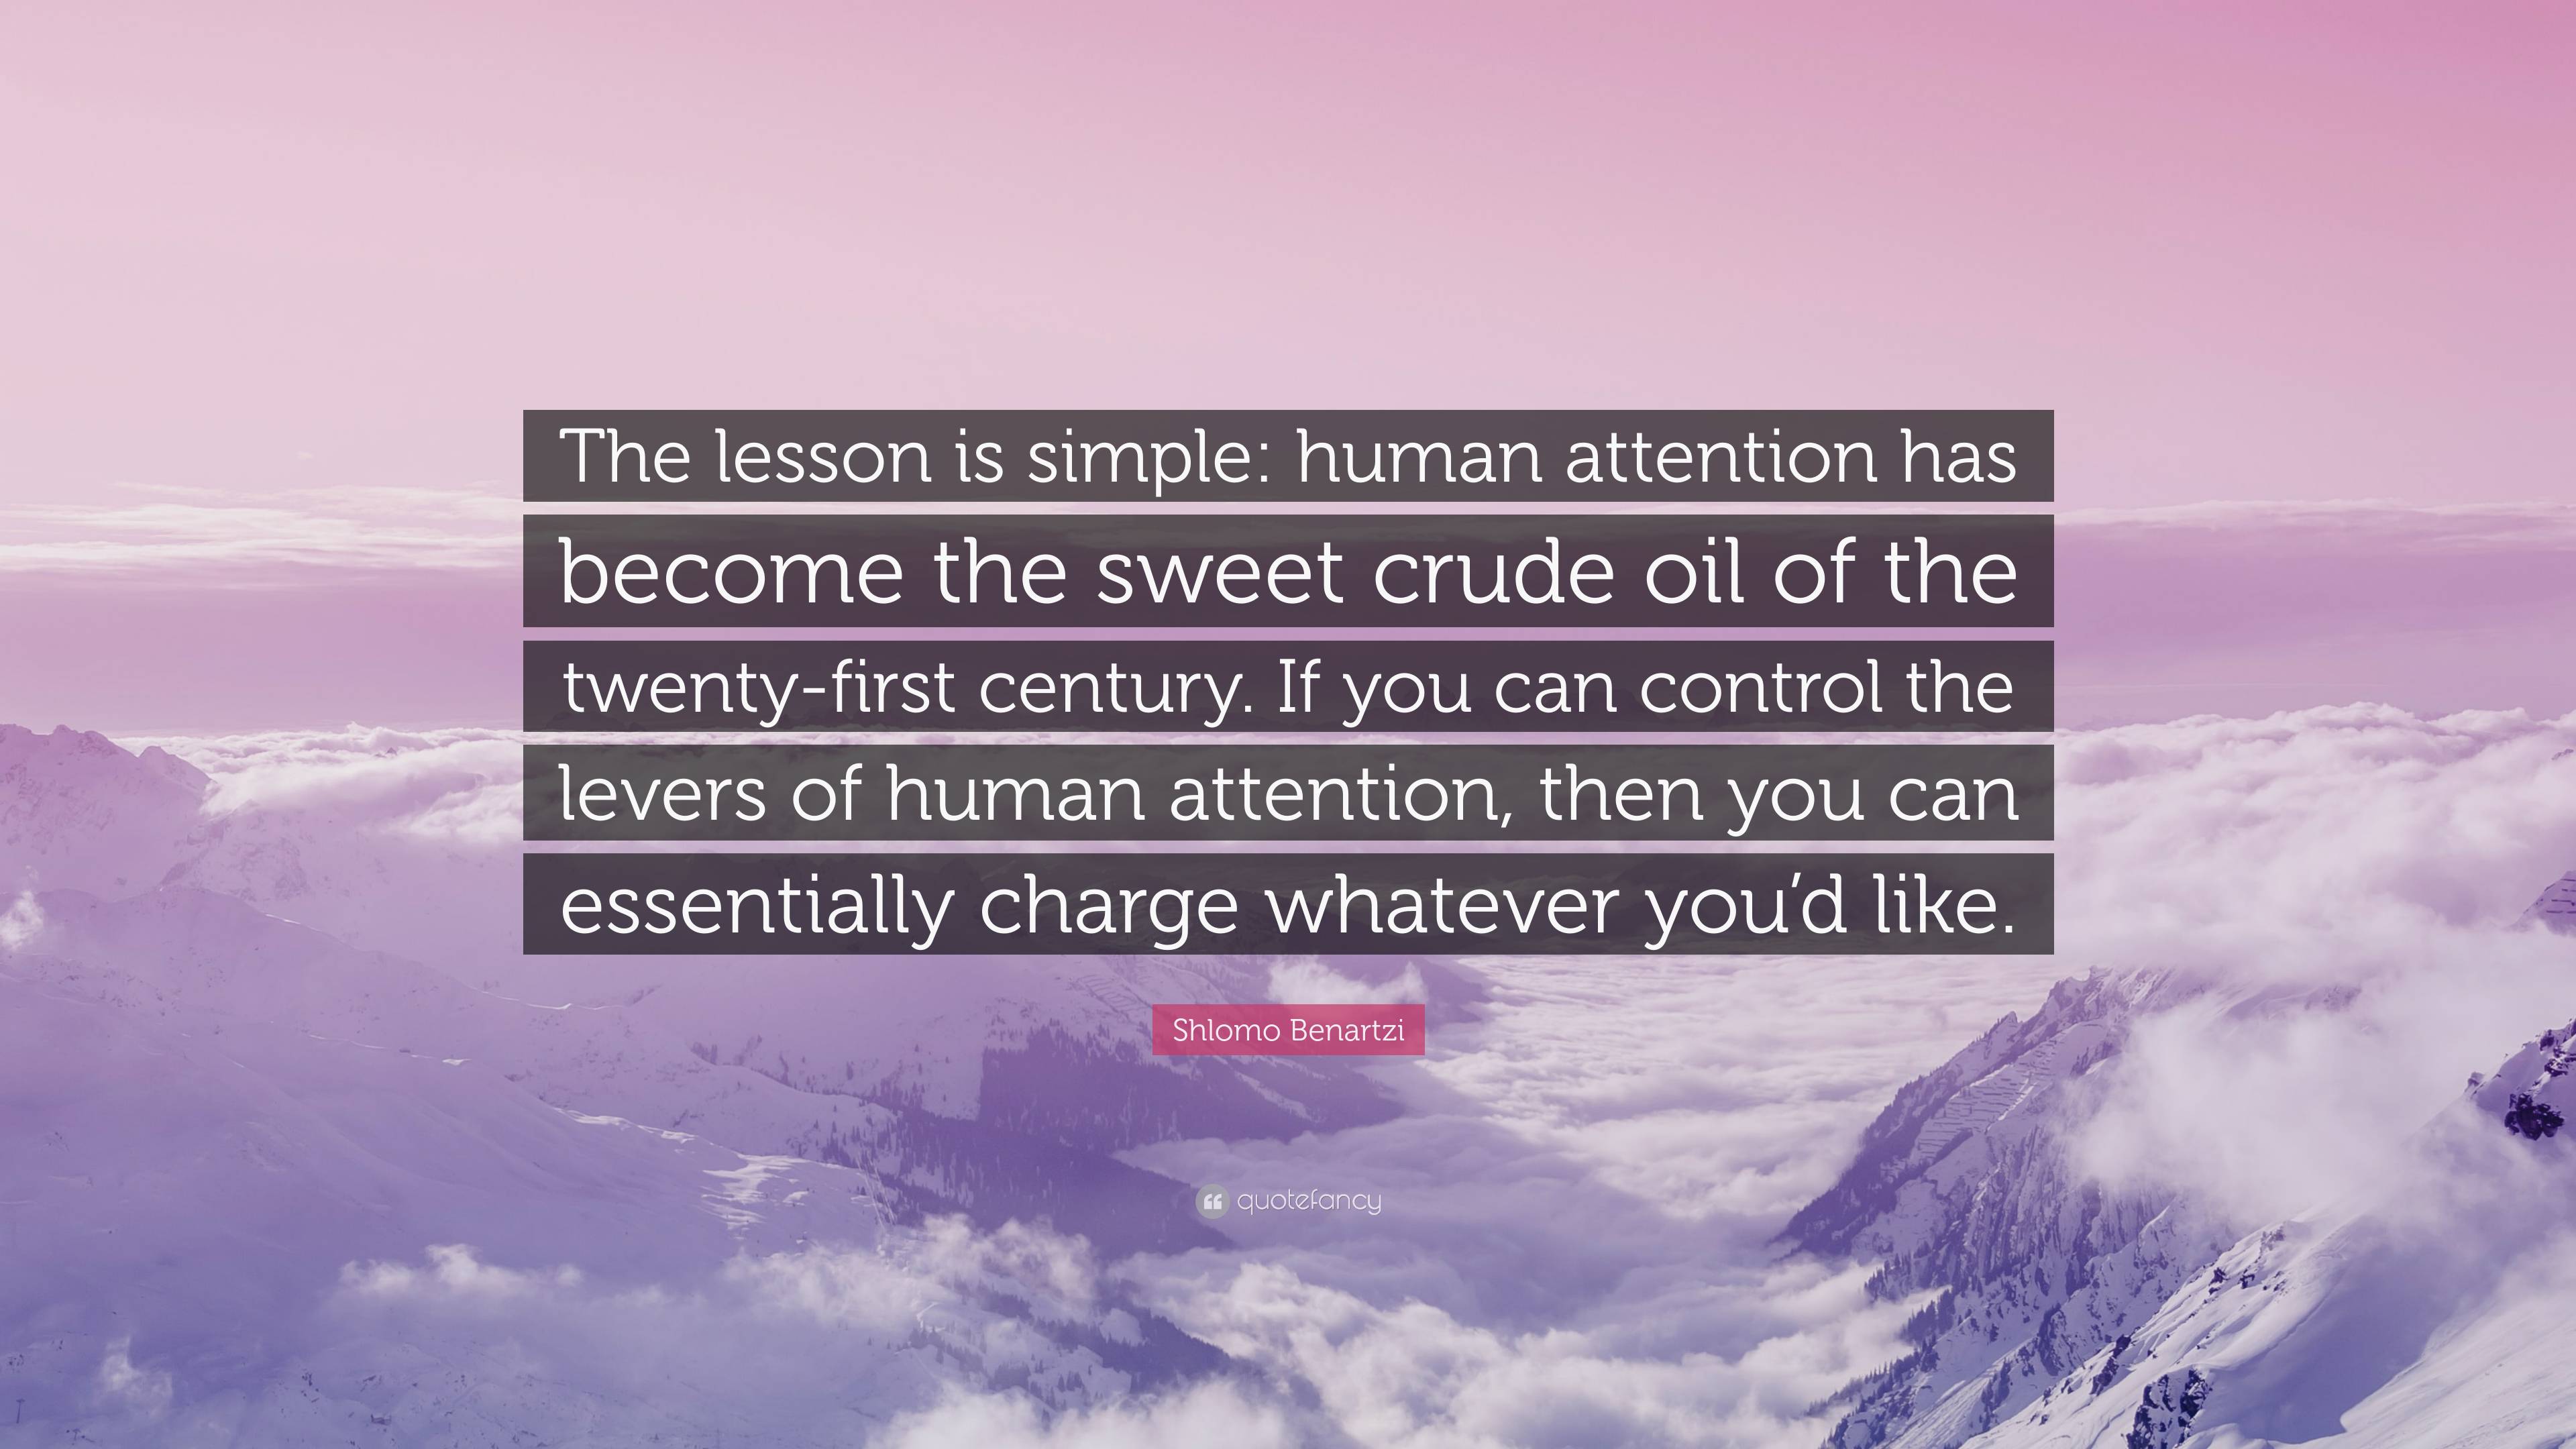 Shlomo Benartzi Quote: “The lesson is simple: human attention has become  the sweet crude oil of the twenty-first century. If you can control the”